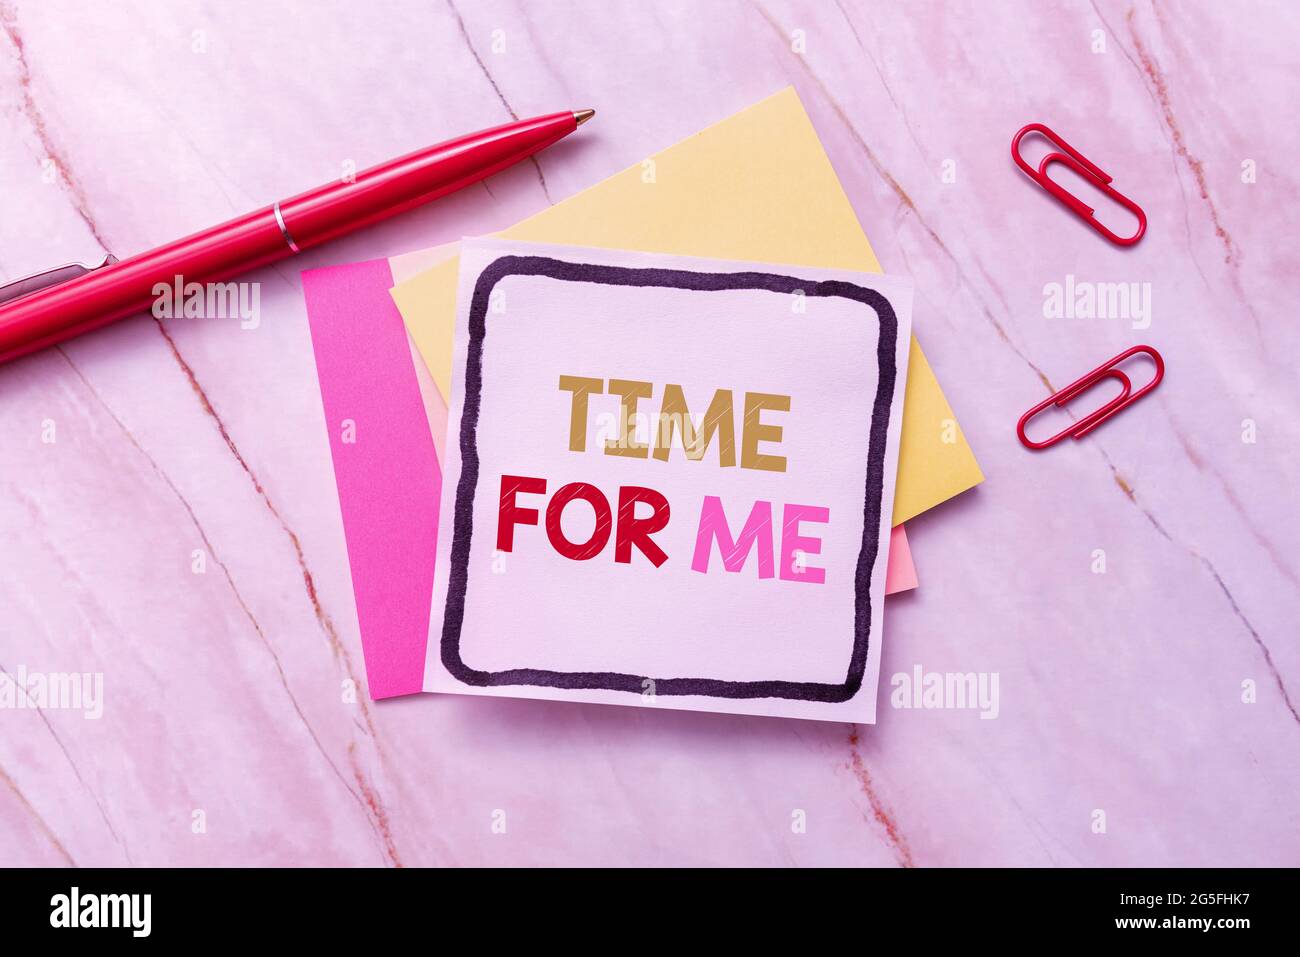 Writing displaying text Time For Me. Business showcase practice of taking action preserve or improve ones own health New Ideas Fresh Concept Creative Stock Photo